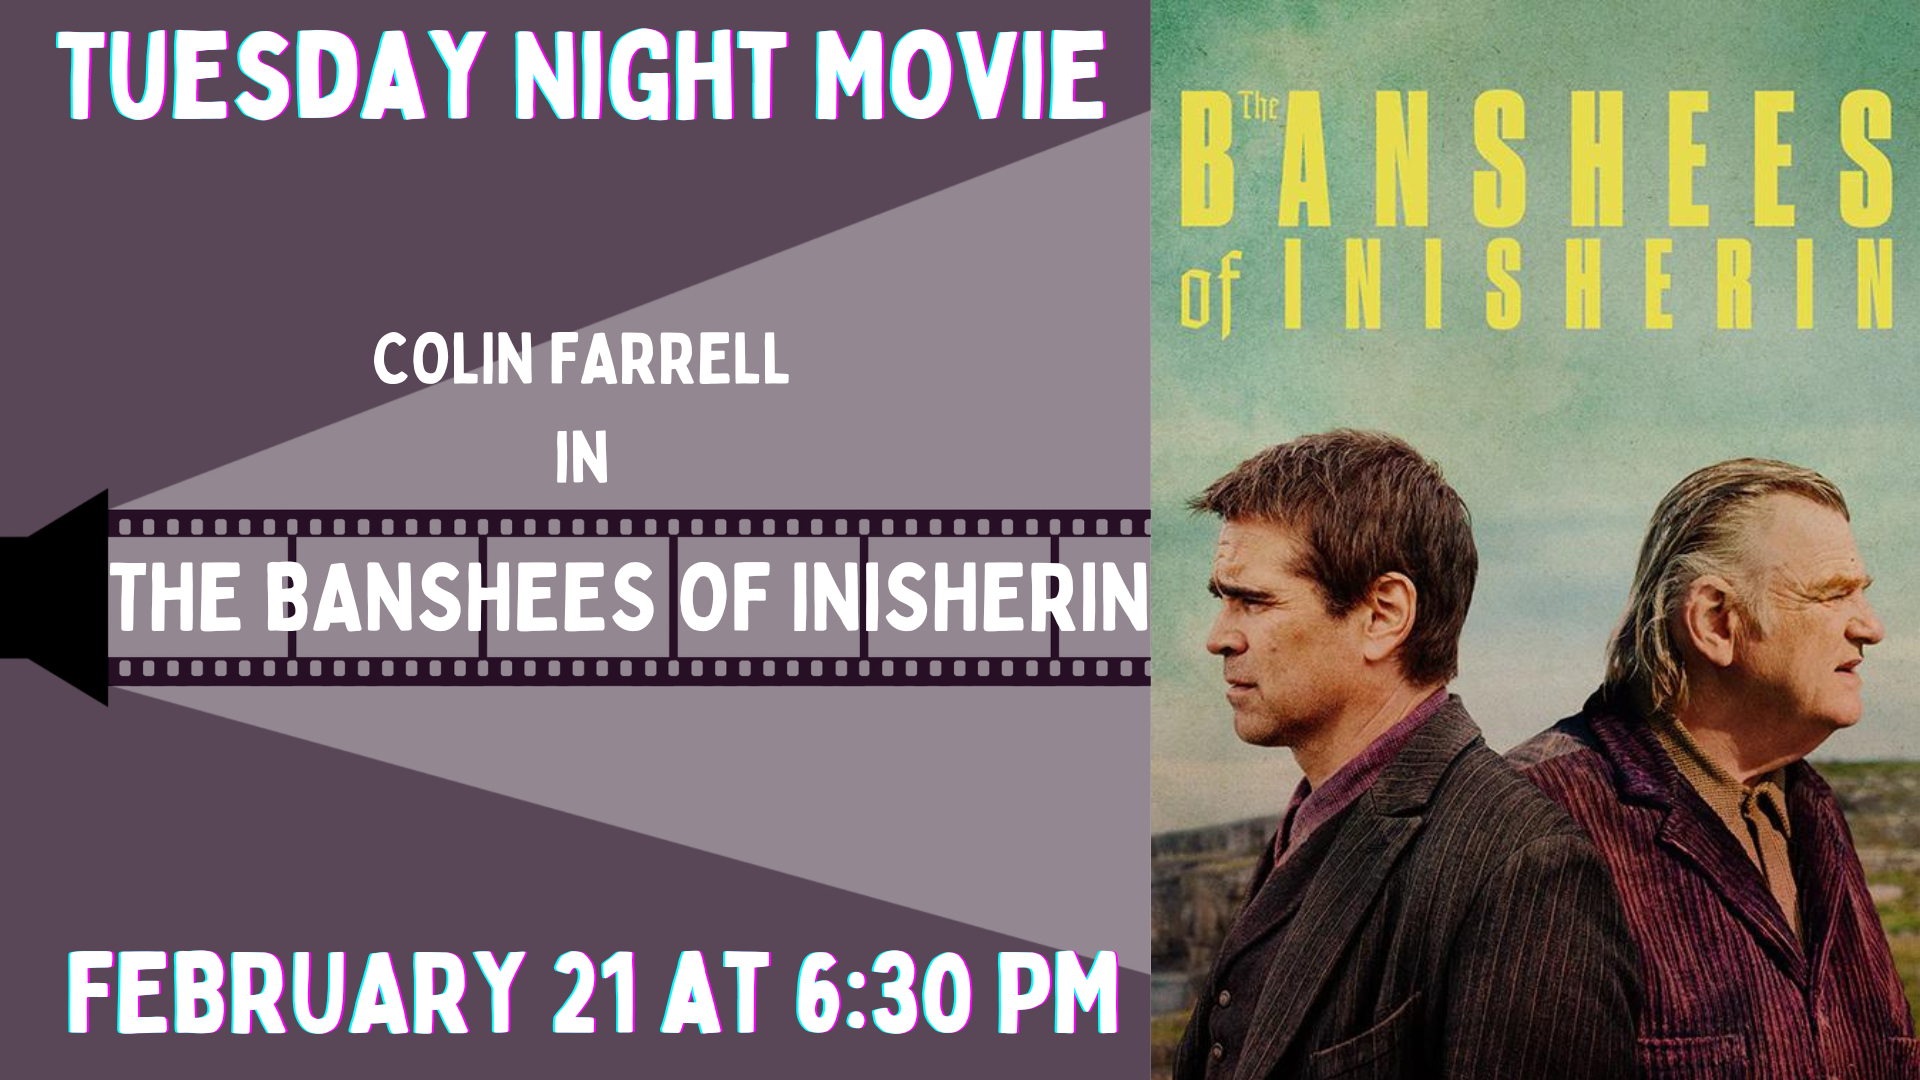 Banner advertising our screening of THE BANSHEES OF INISHERIN on February 21 at 6:30 PM